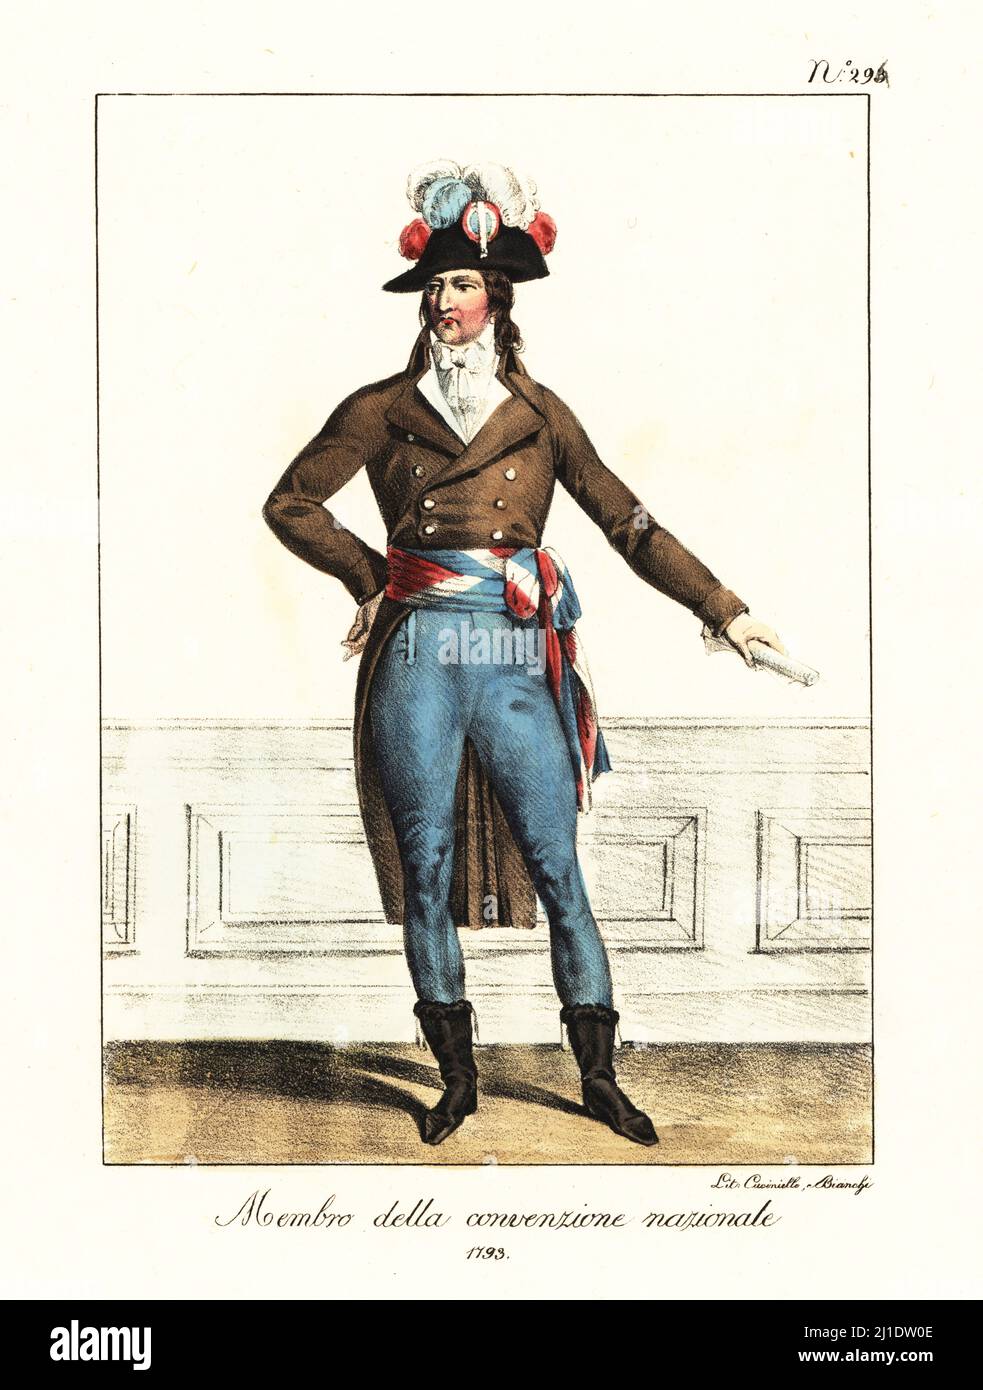 Costume of a Member of the National Convention, French Revolutionary era, 1793. In bicorne with tricolor plumes, brown coat, cravat, blue trousers, tricolor sash belt, calf-length boots. Membre de la Convention nationale. Handcoloured lithograph by Lorenzo Bianchi and Domenico Cuciniello after Hippolyte Lecomte from Costumi civili e militari della monarchia francese dal 1200 al 1820, Naples, 1825. Italian edition of Lecomte’s Civilian and military costumes of the French monarchy from 1200 to 1820. Stock Photo